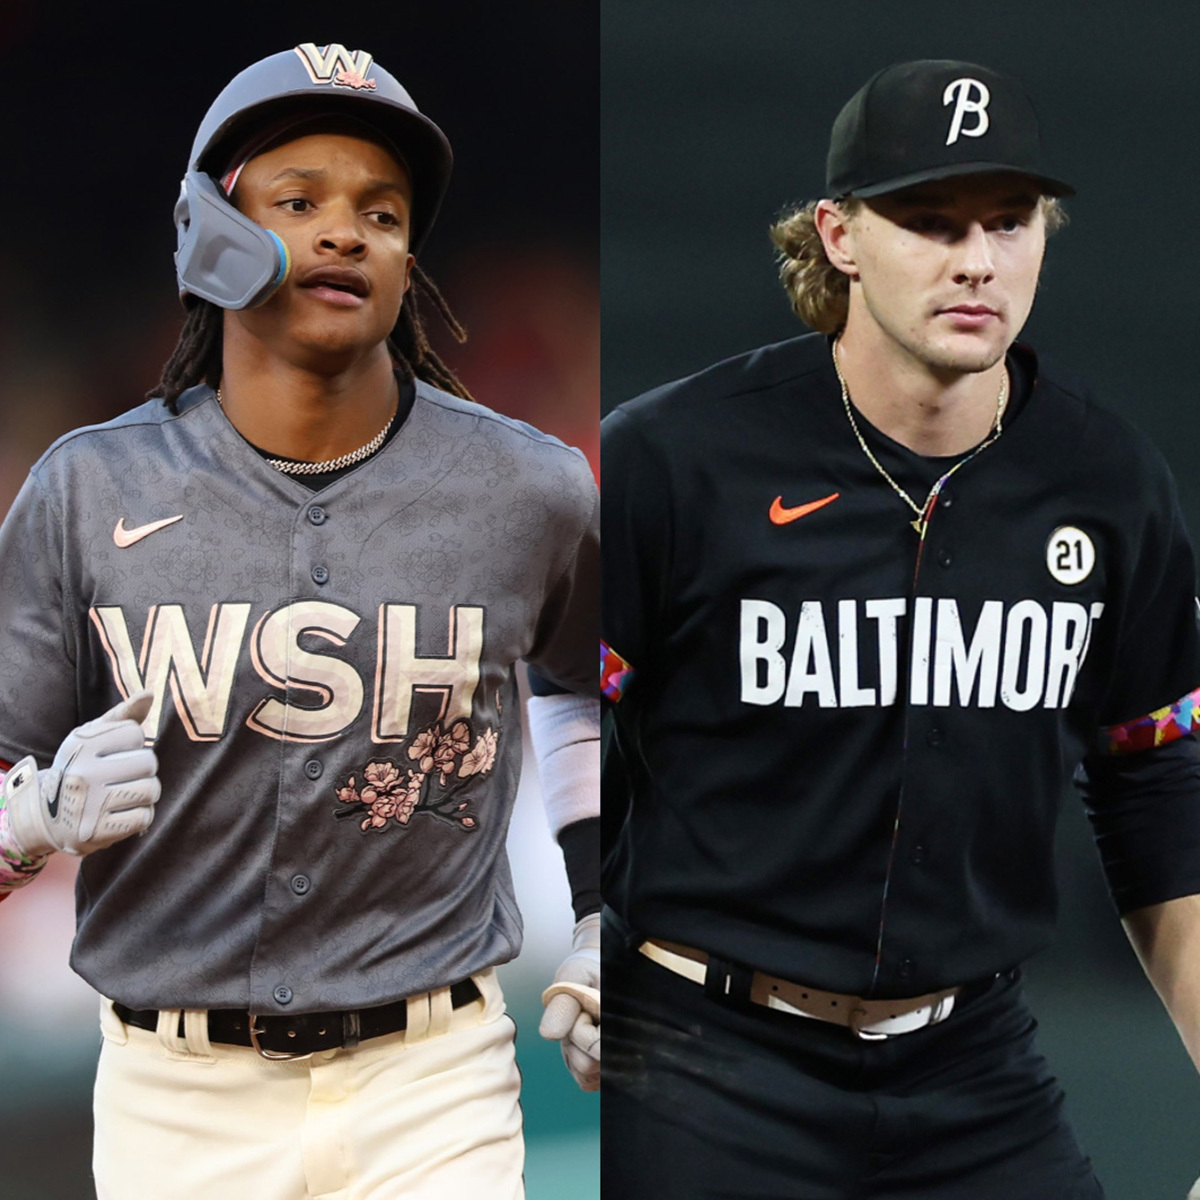 The Nationals and Orioles will become the first MLB teams to wear their City Connect uniforms against each other The Beltway Series: Cities Connected is set to take place next week, with both teams wearing their City Connect uniforms for Game 1 on Tuesday, May 7